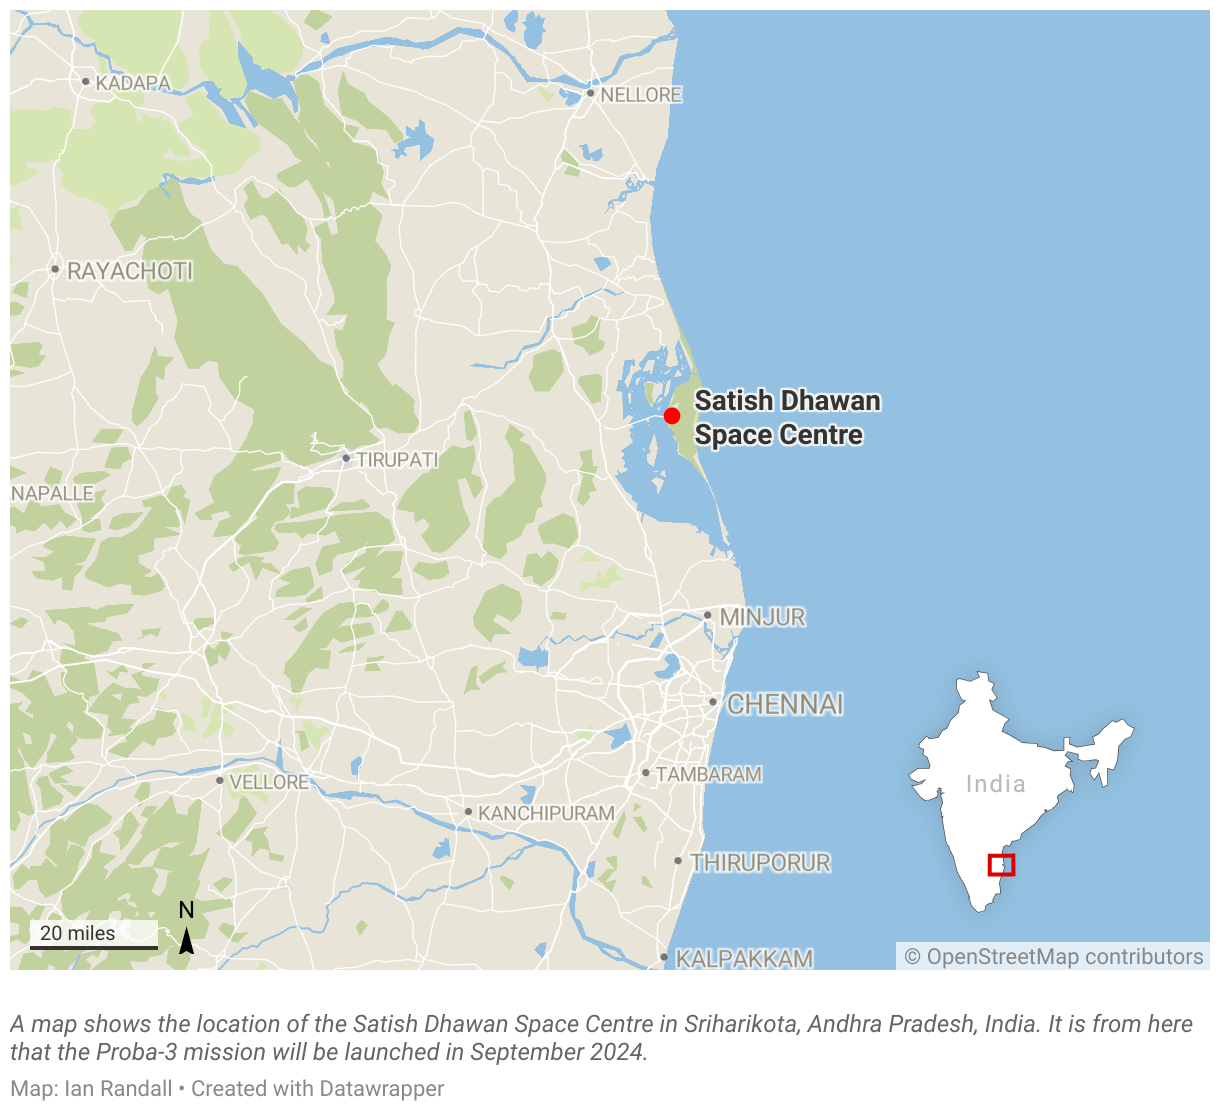 A map shows the location of the Satish Dhawan Space Centre in Sriharikota, Andhra Pradesh, India.